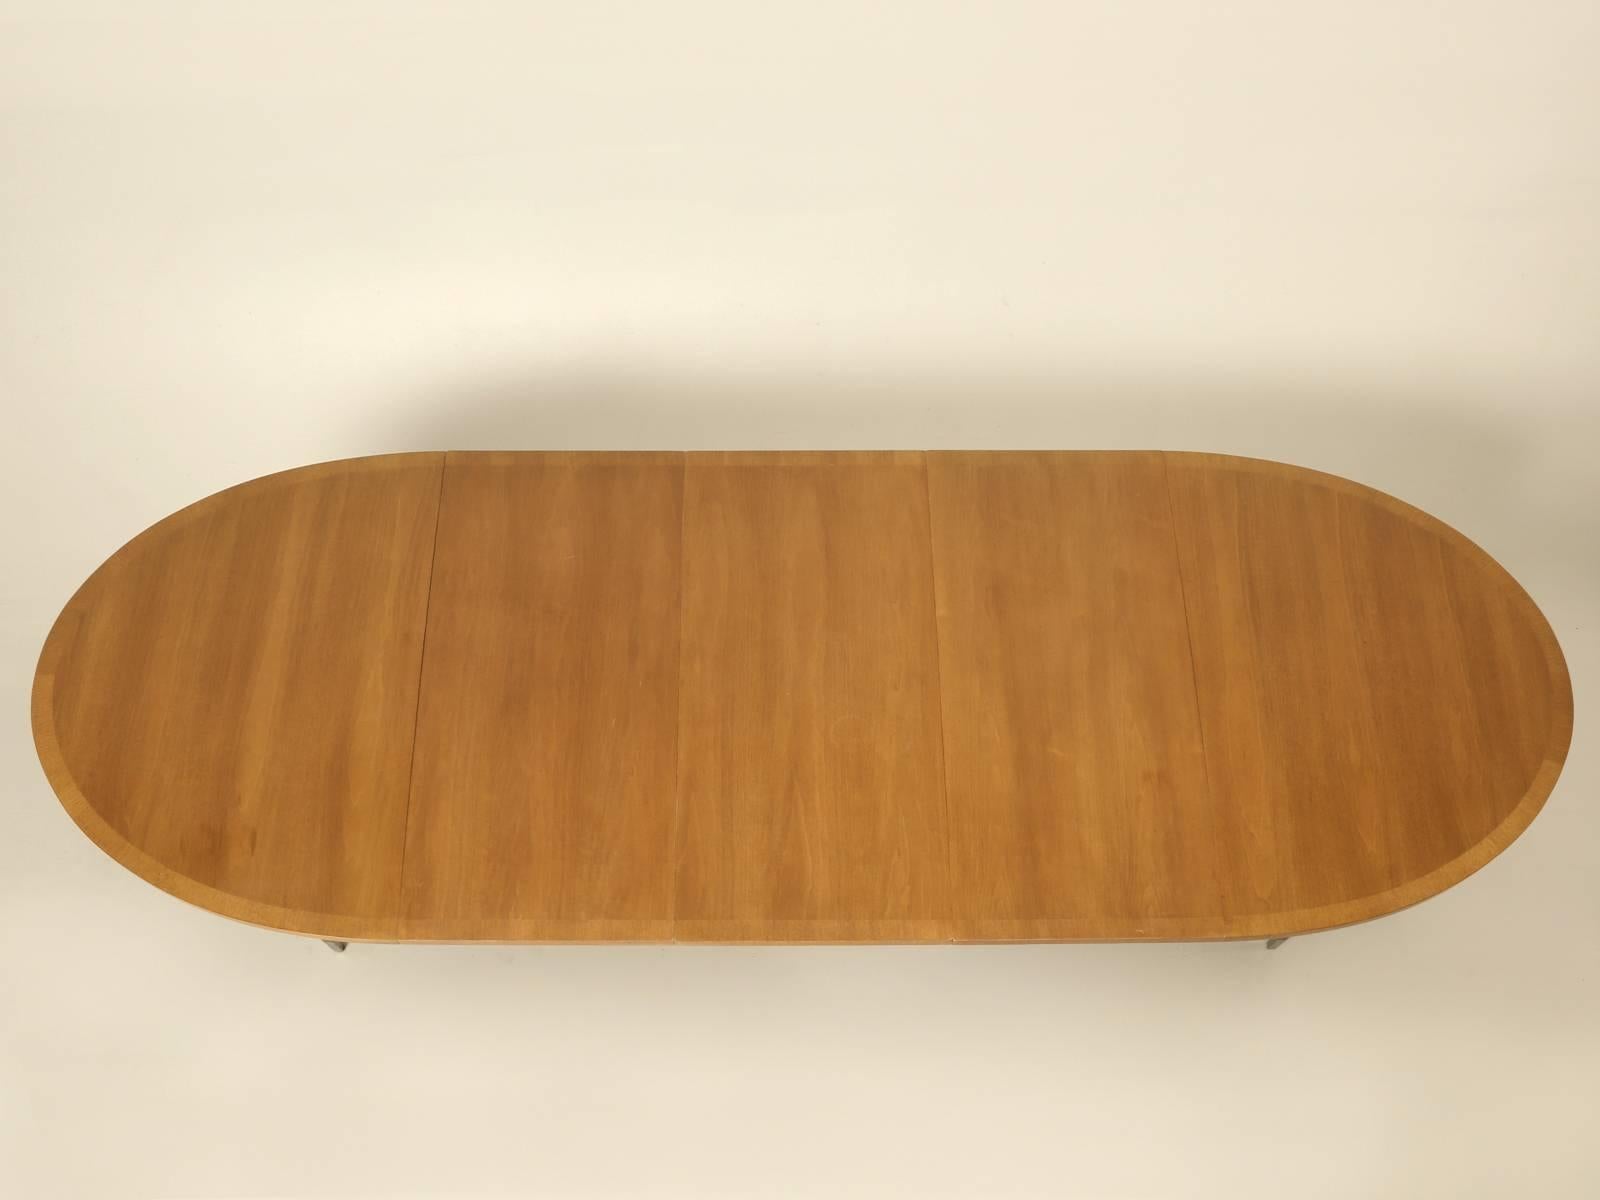 American Mid-Century Modern Dining Table by the Sligh Furniture Company